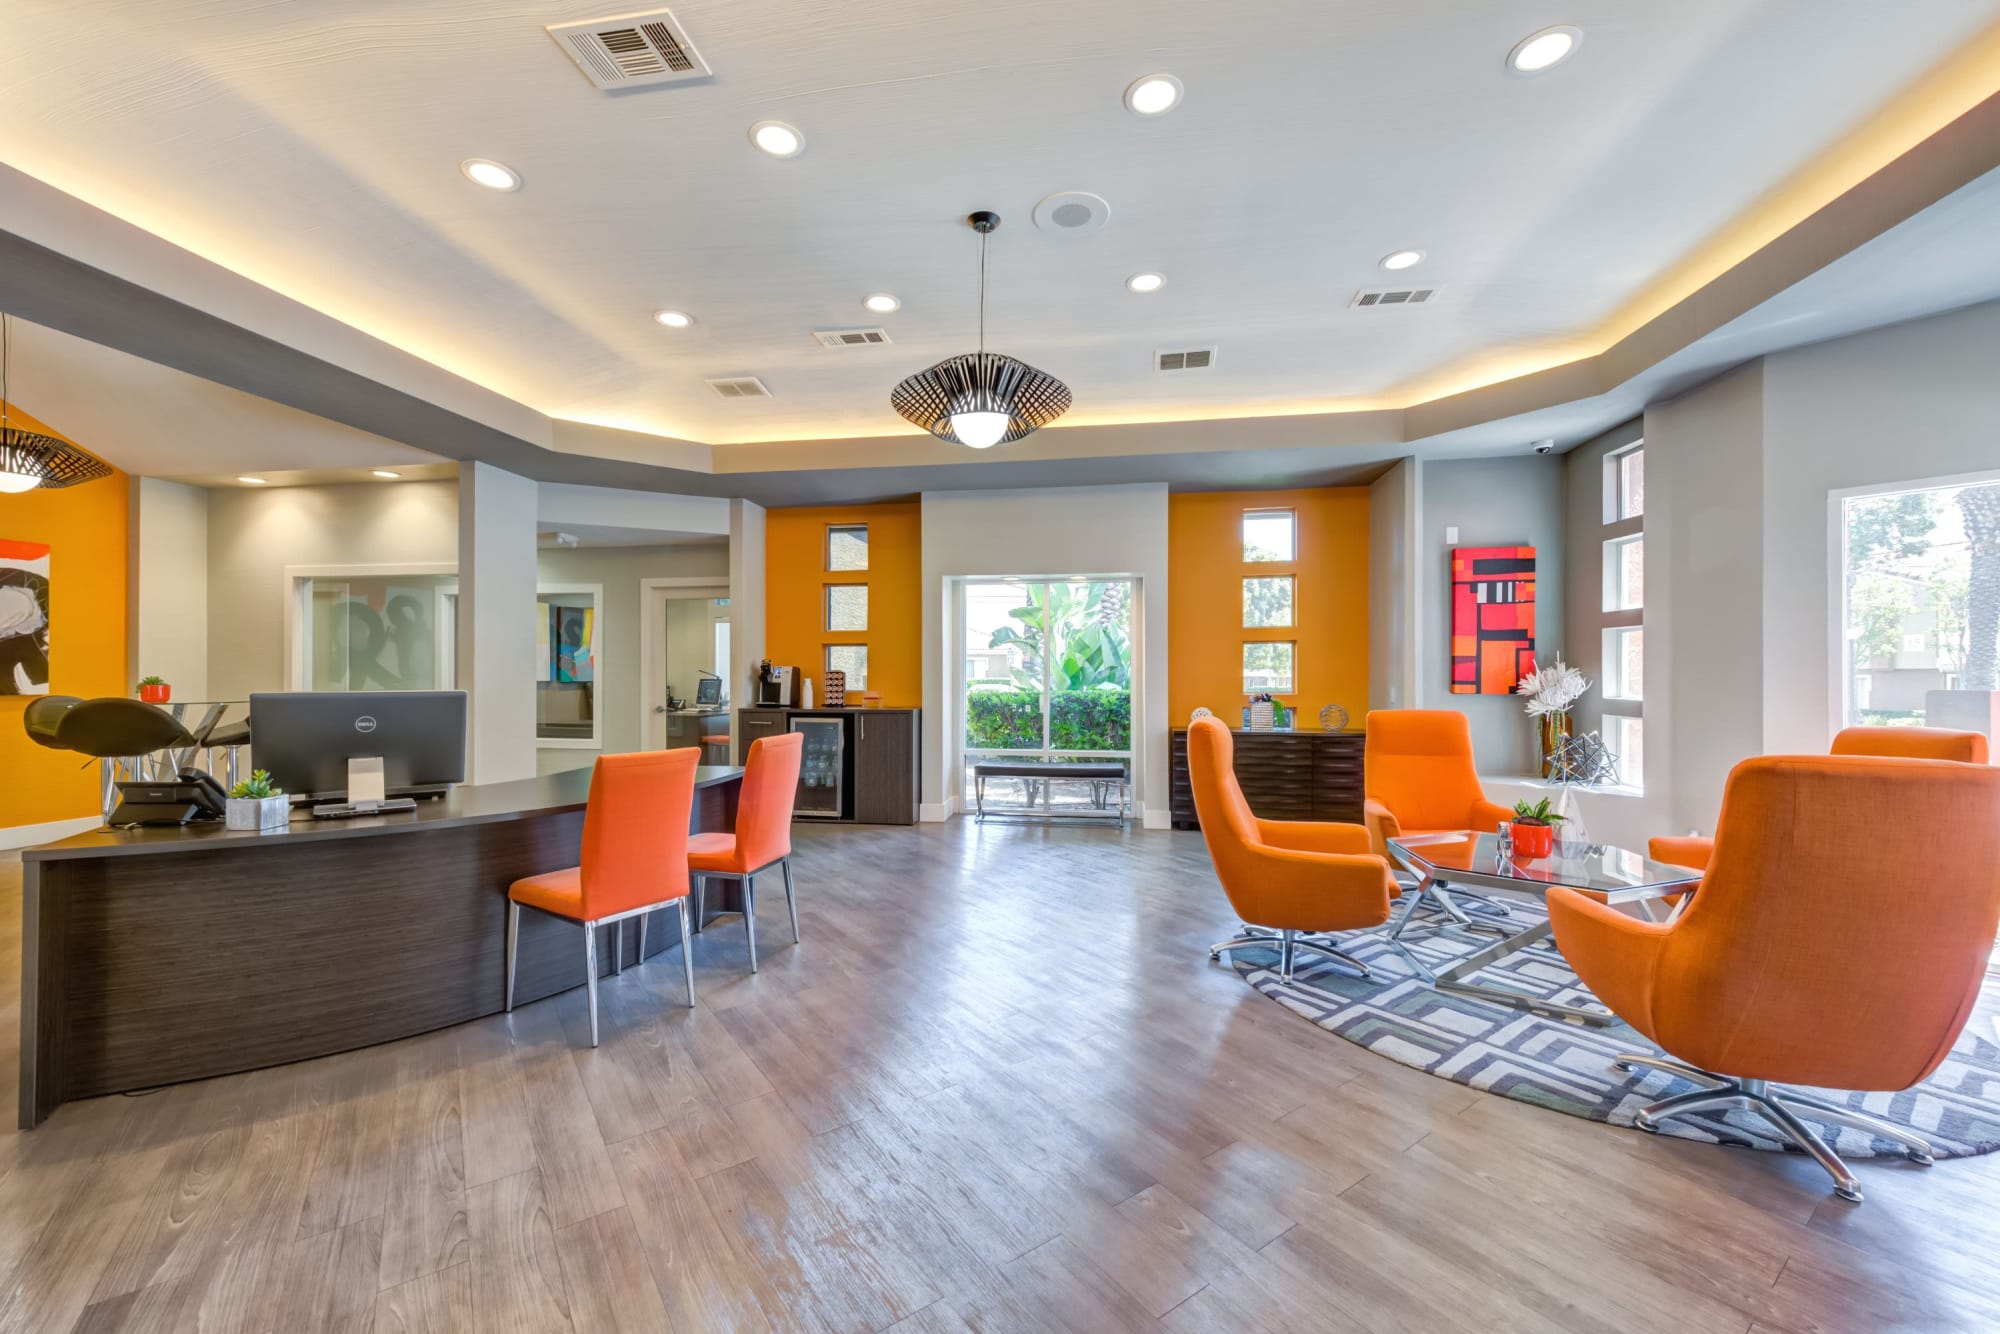 Interior of the clubhouse at Tuscany Village Apartments in Ontario, California